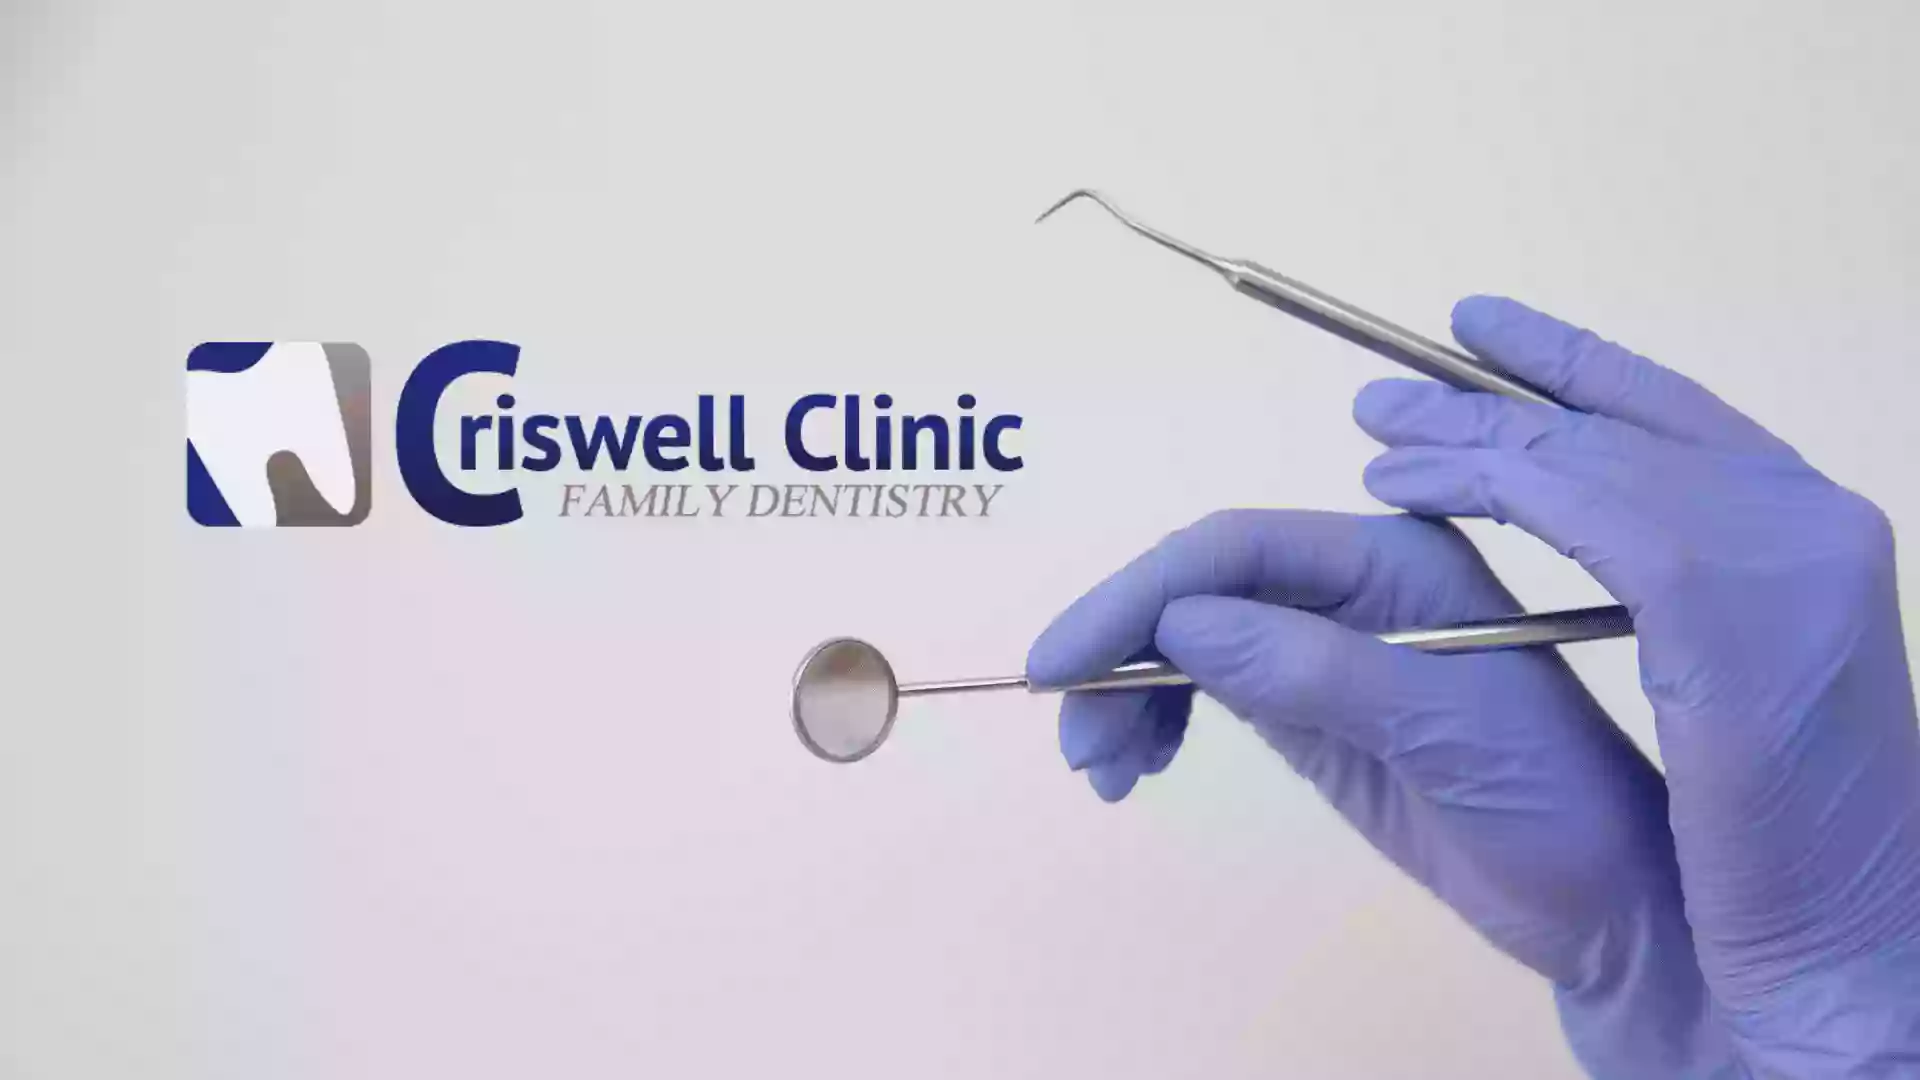 Criswell Clinic Family Dentistry